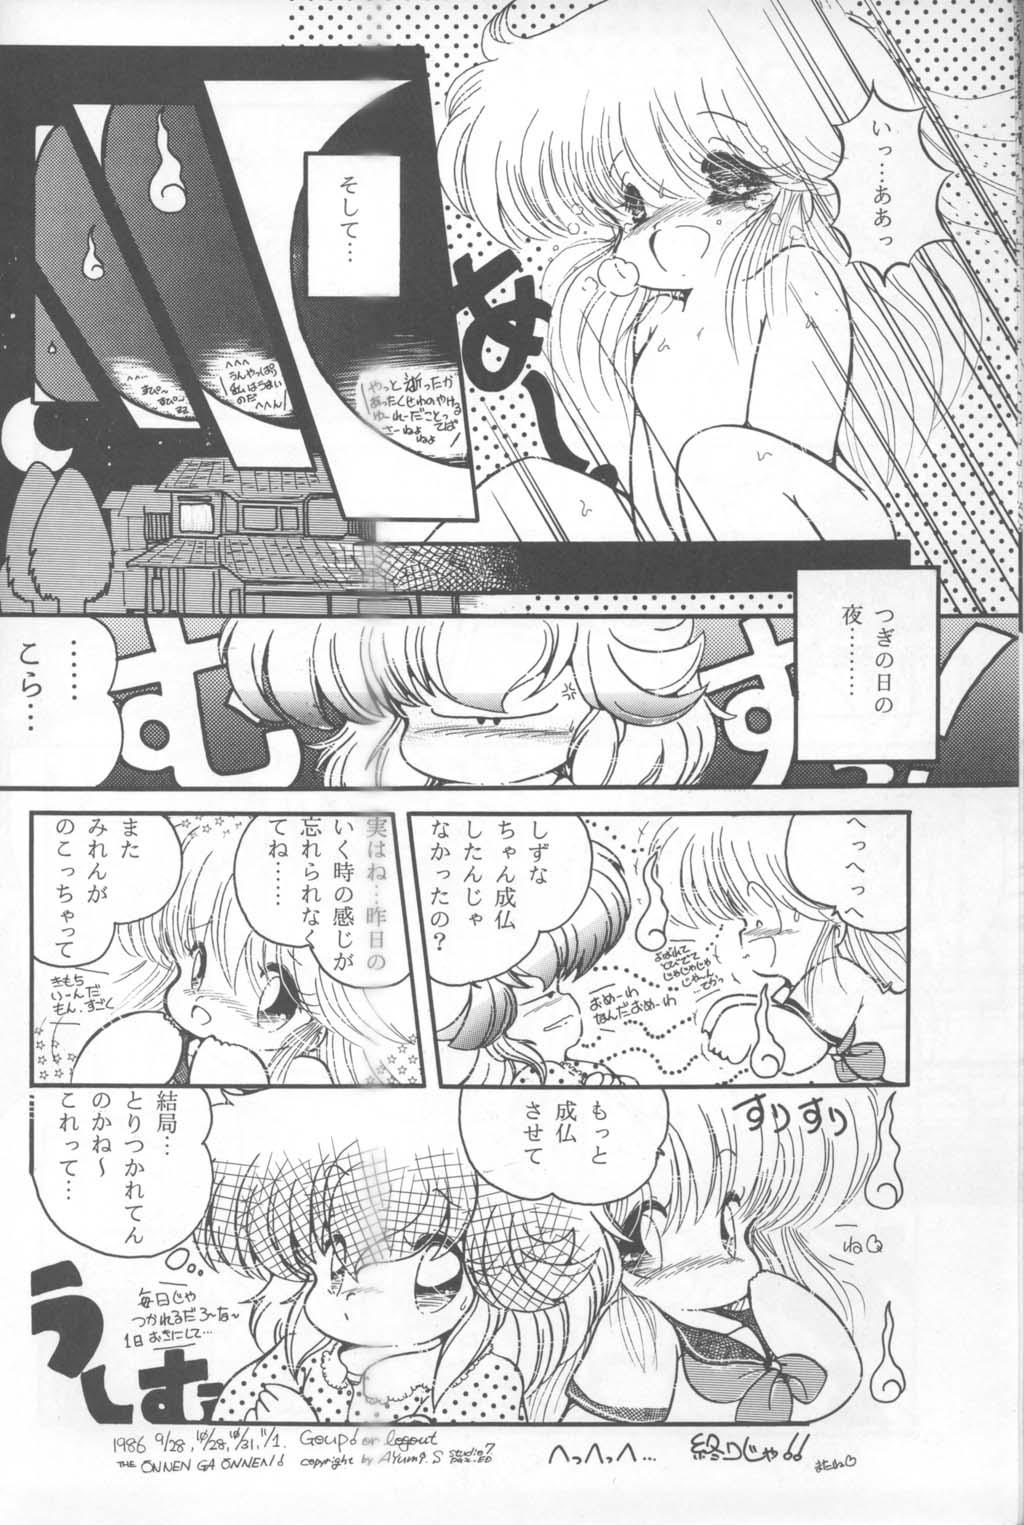 Licking MEMORIES - Dirty pair Curves - Page 11